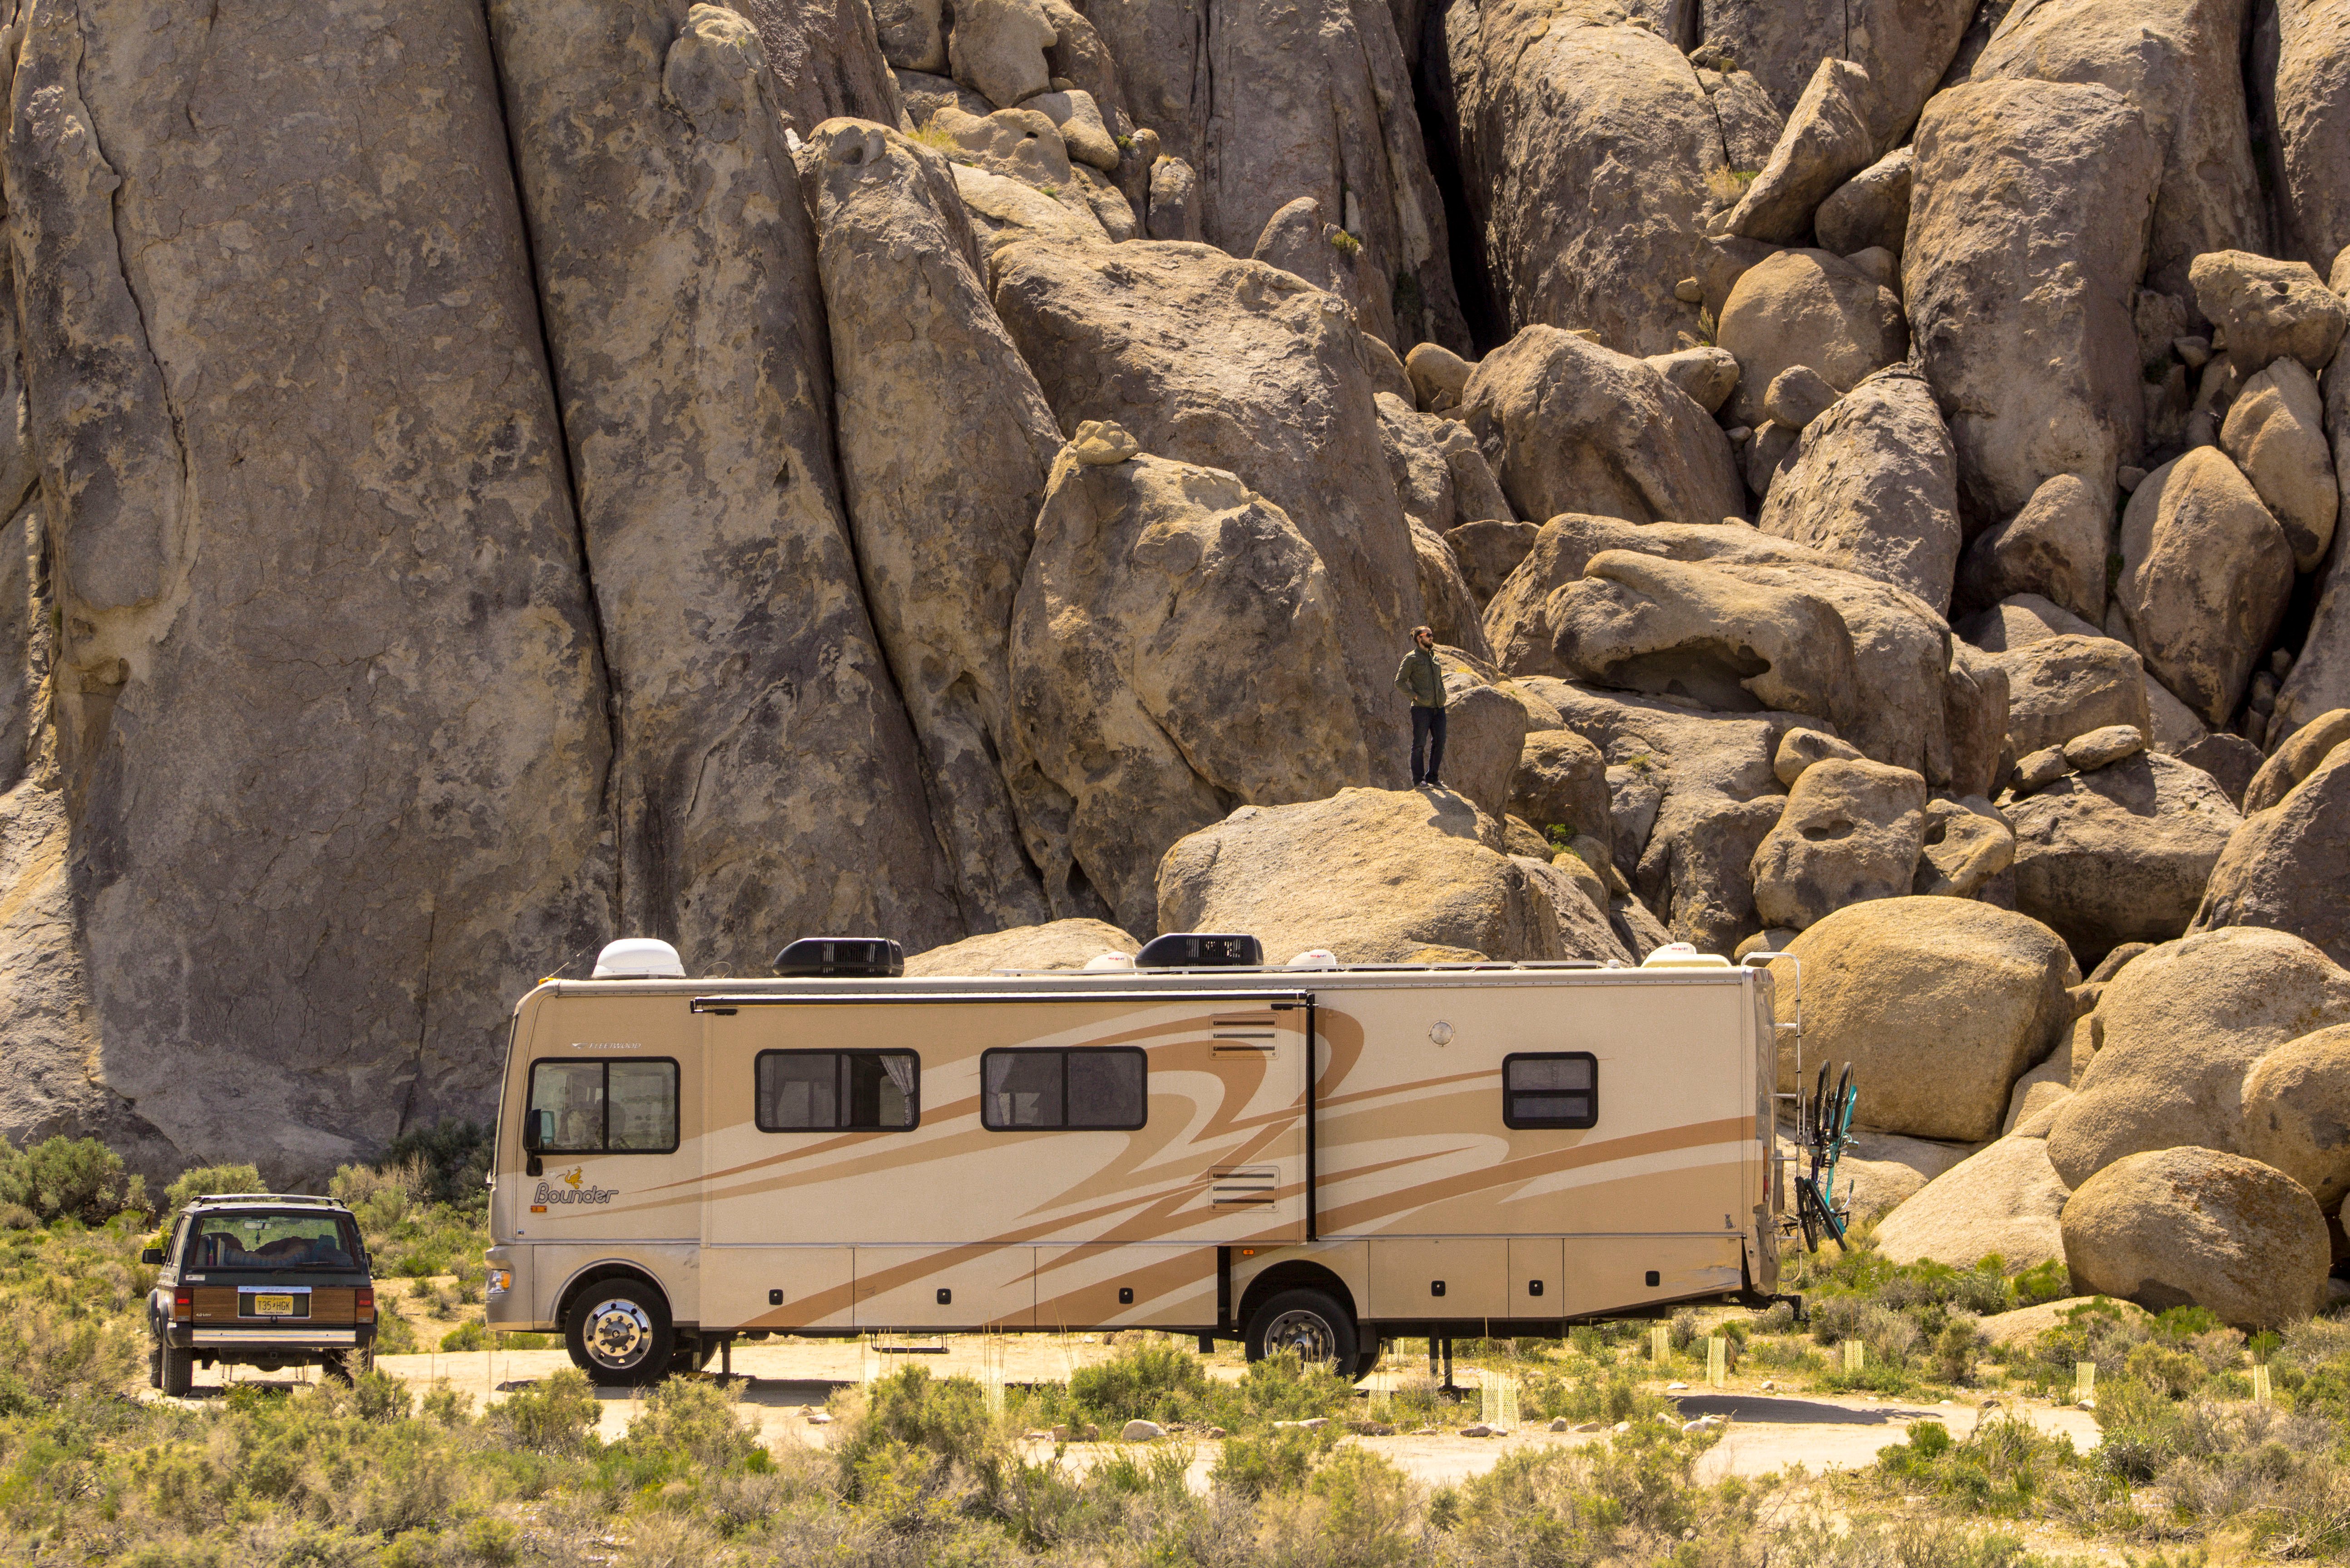 Use a generator or solar panels to recharge your RV's batteries when boondocking.